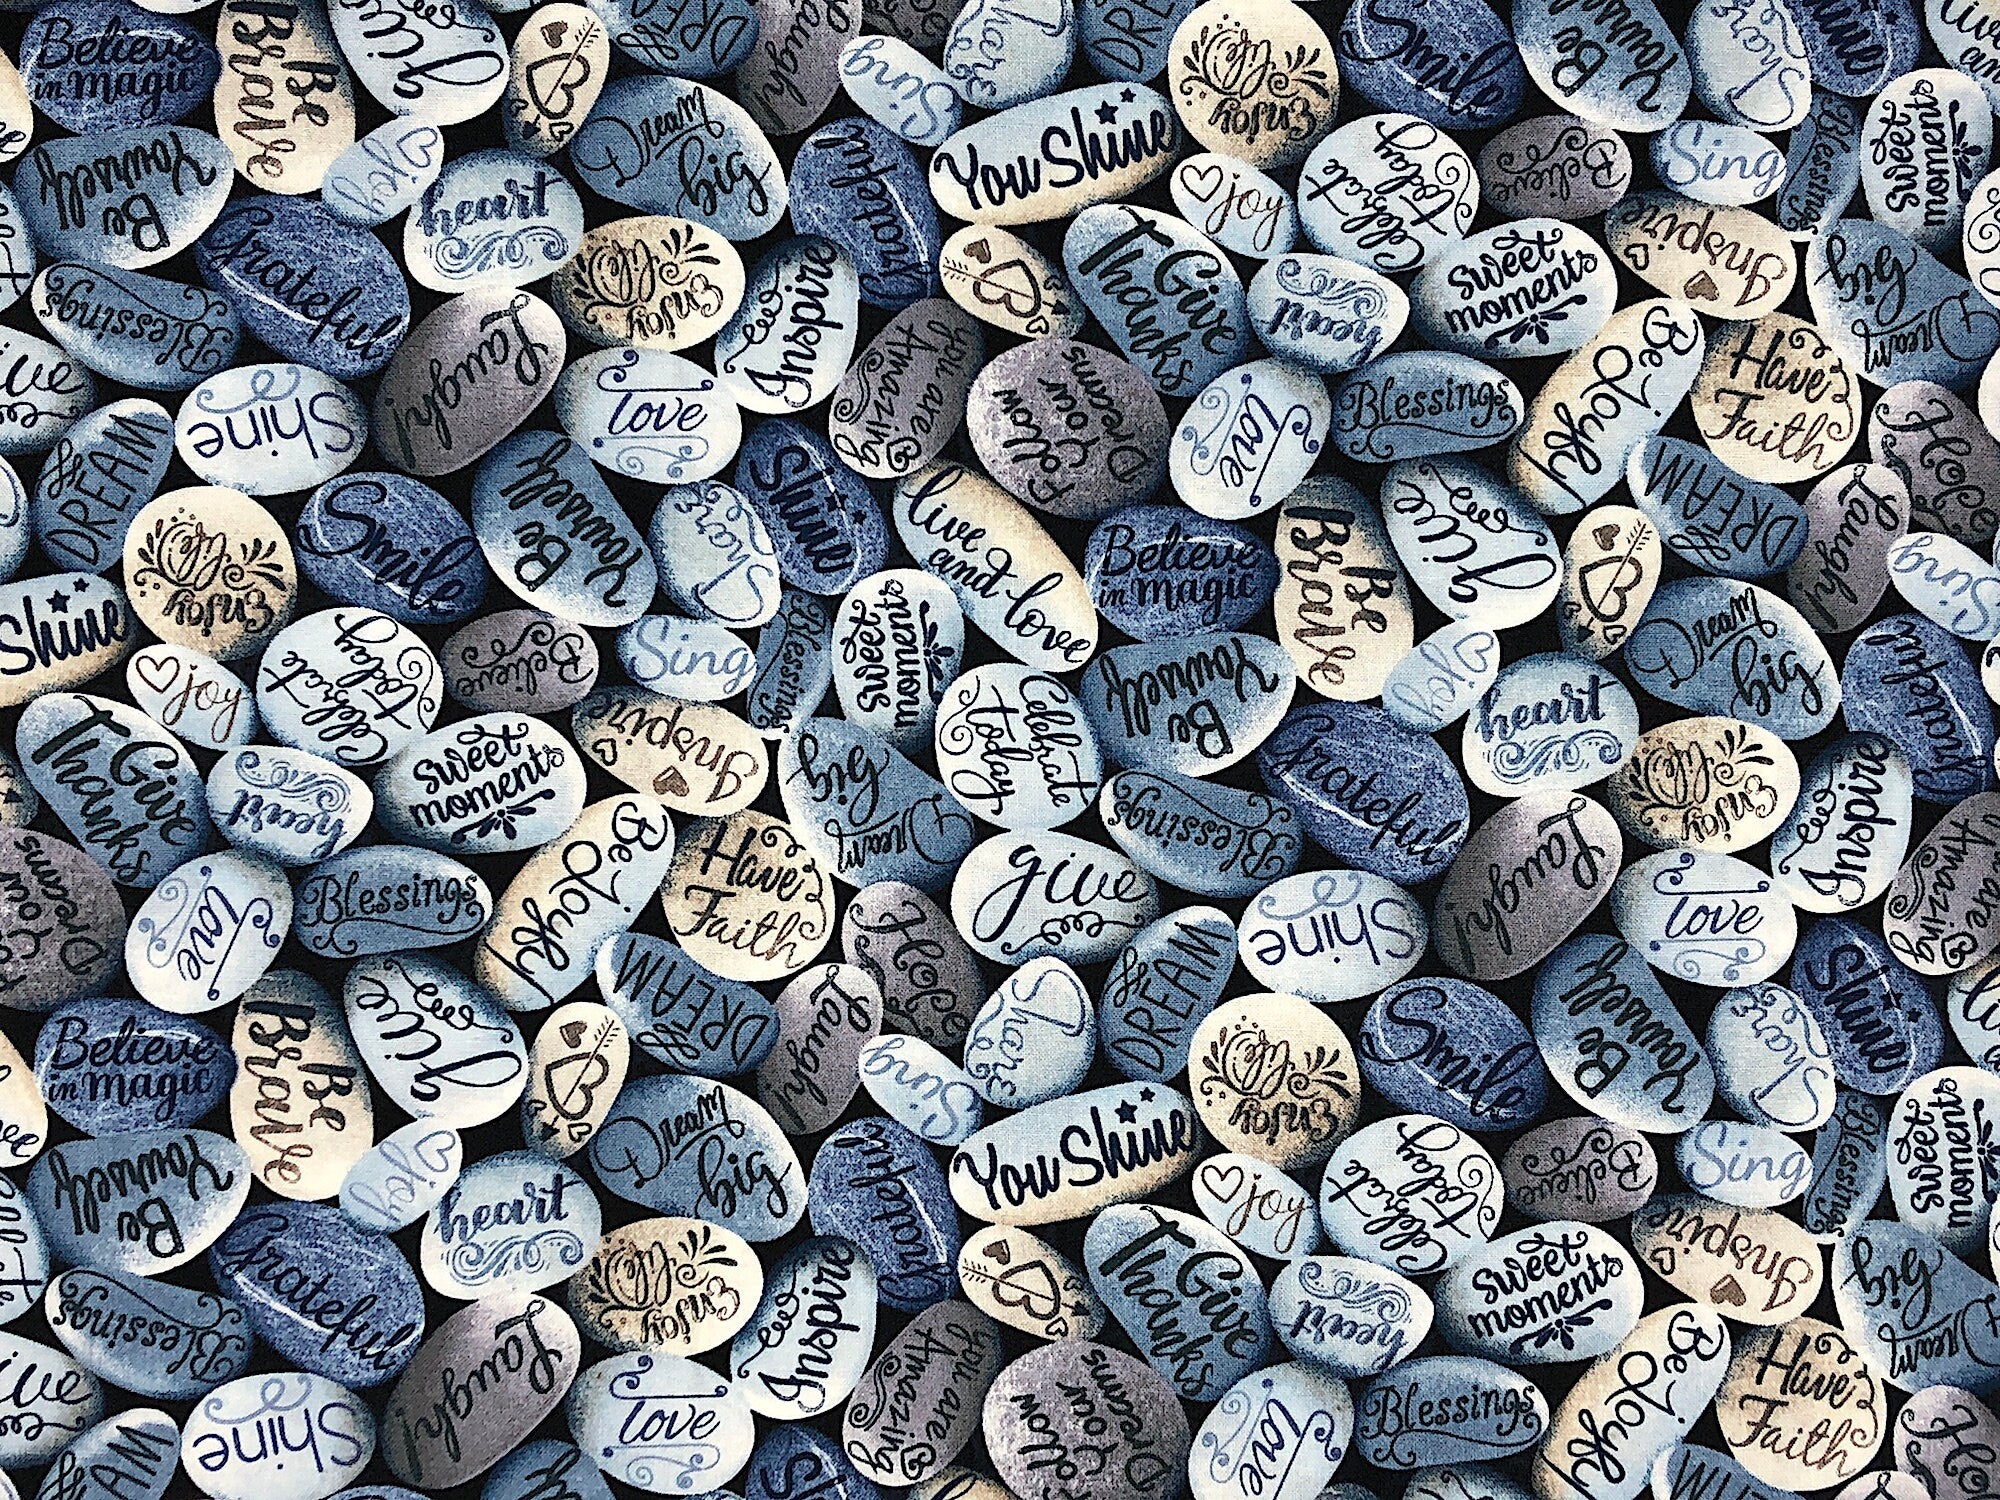 This cotton fabric is covered with stones with inspirational sayings such as you shine, live and love, heart, love and more.